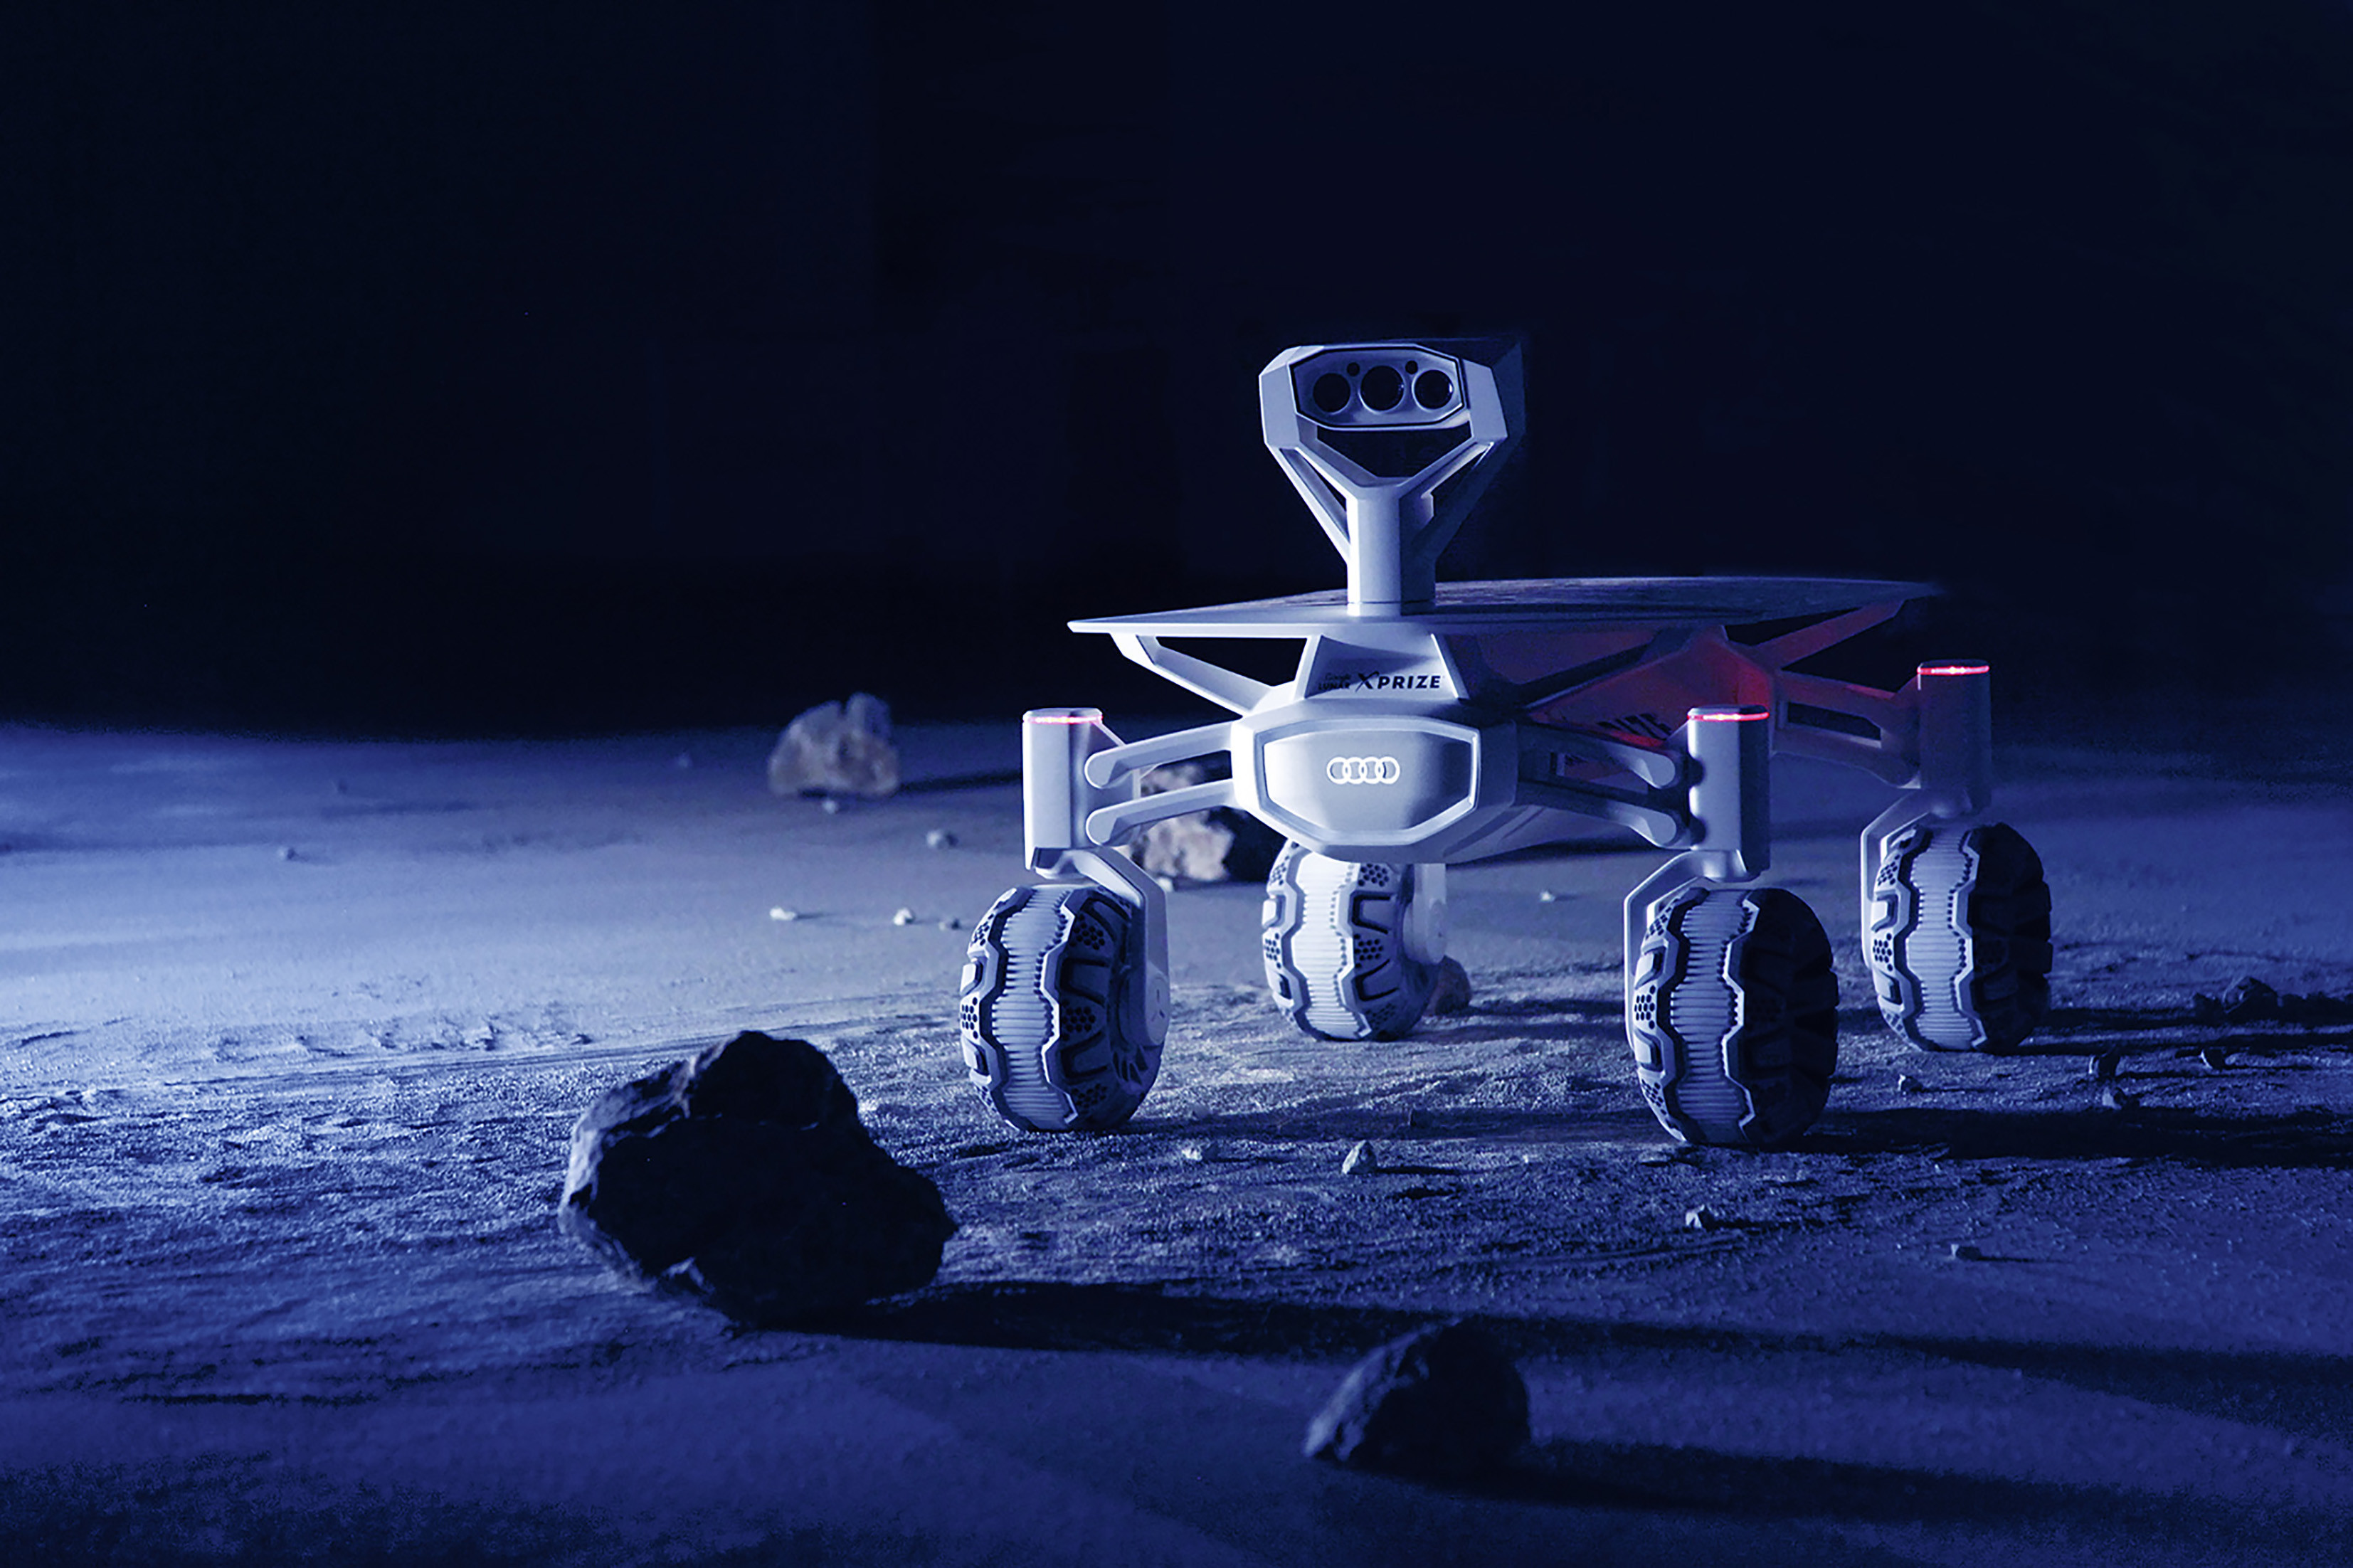 MISSION TO THE MOONAudi lunar quattroTop speed 3.6 km/h – The Audi lunar quattro, the moon rover.